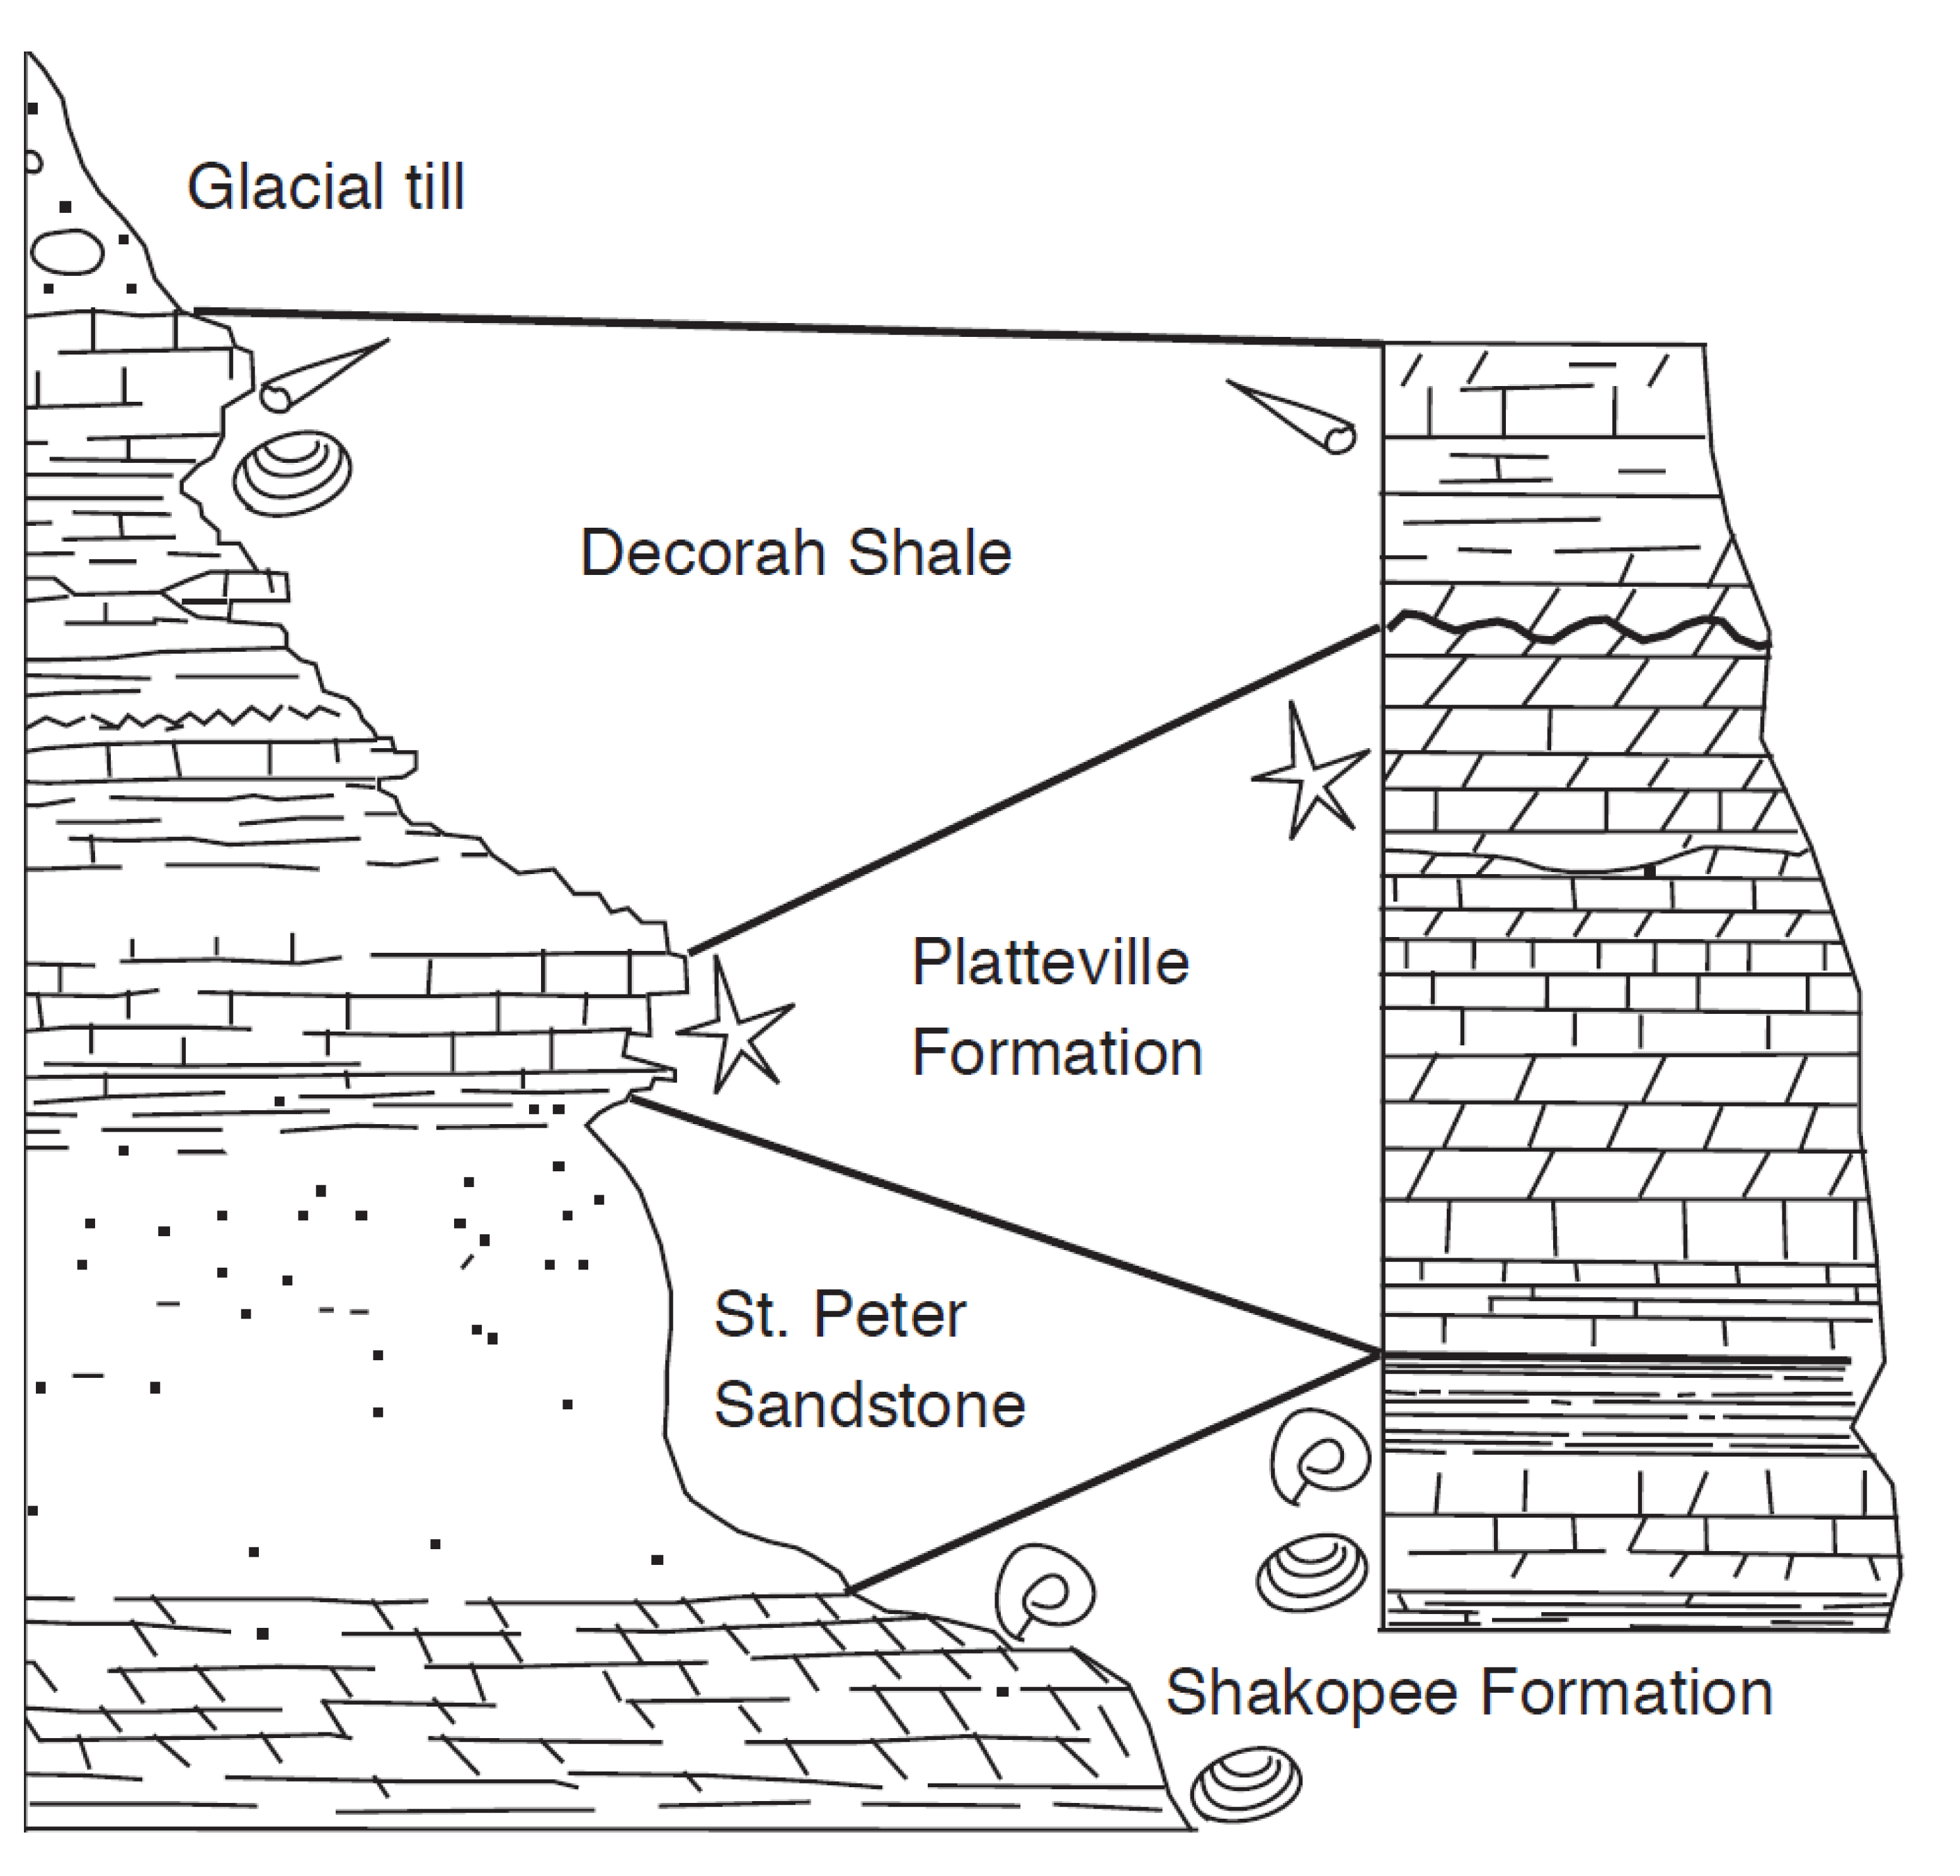 Rock layers within two different bluffs along the Mississippi River illustrate the principles of superposition and faunal assemblages.